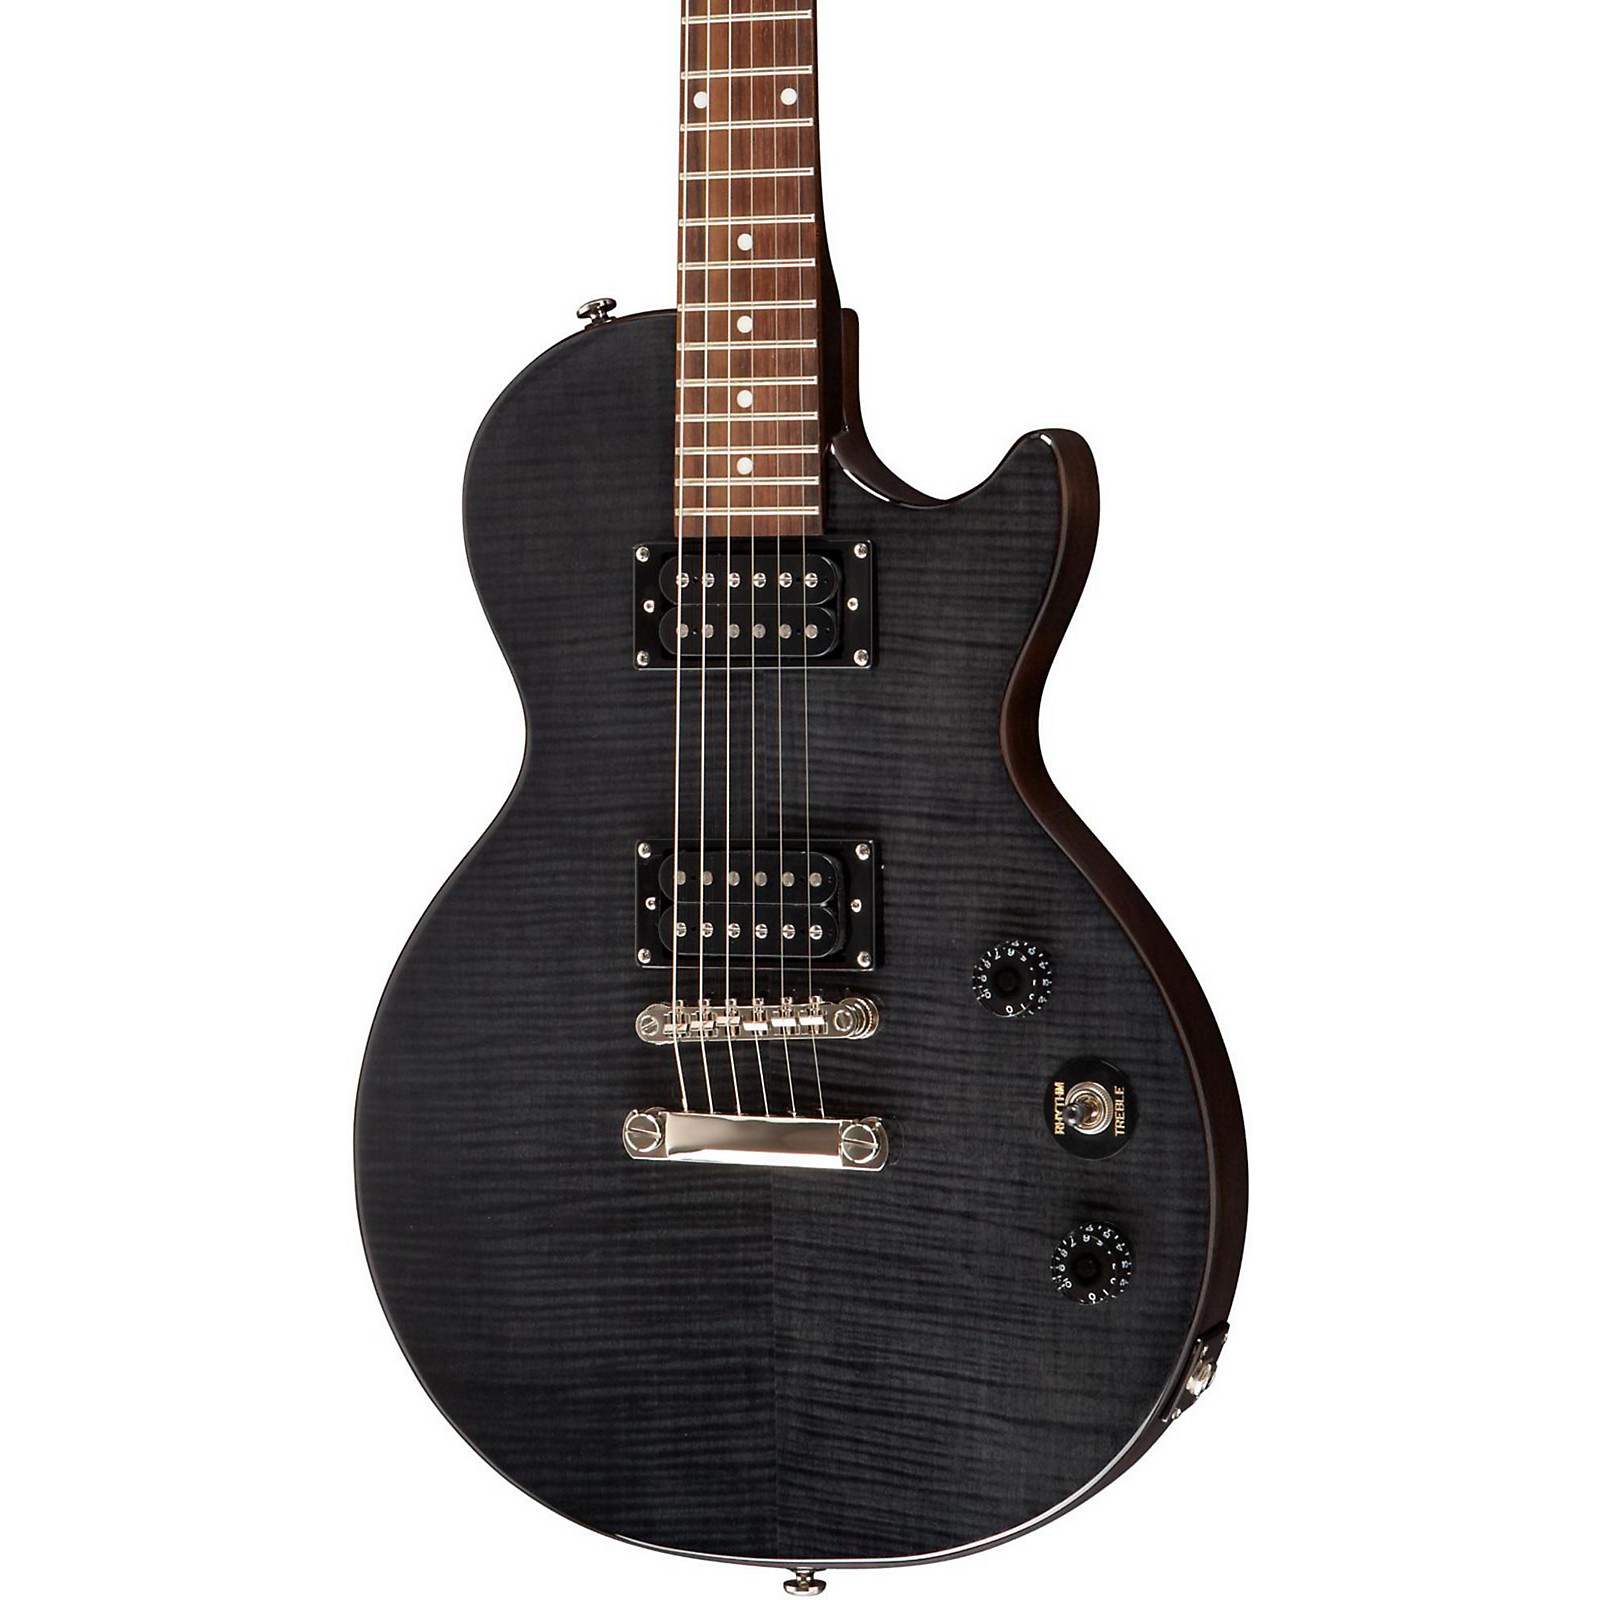 Epiphone Les Paul Special II Plus Top Limited-Edition Electric